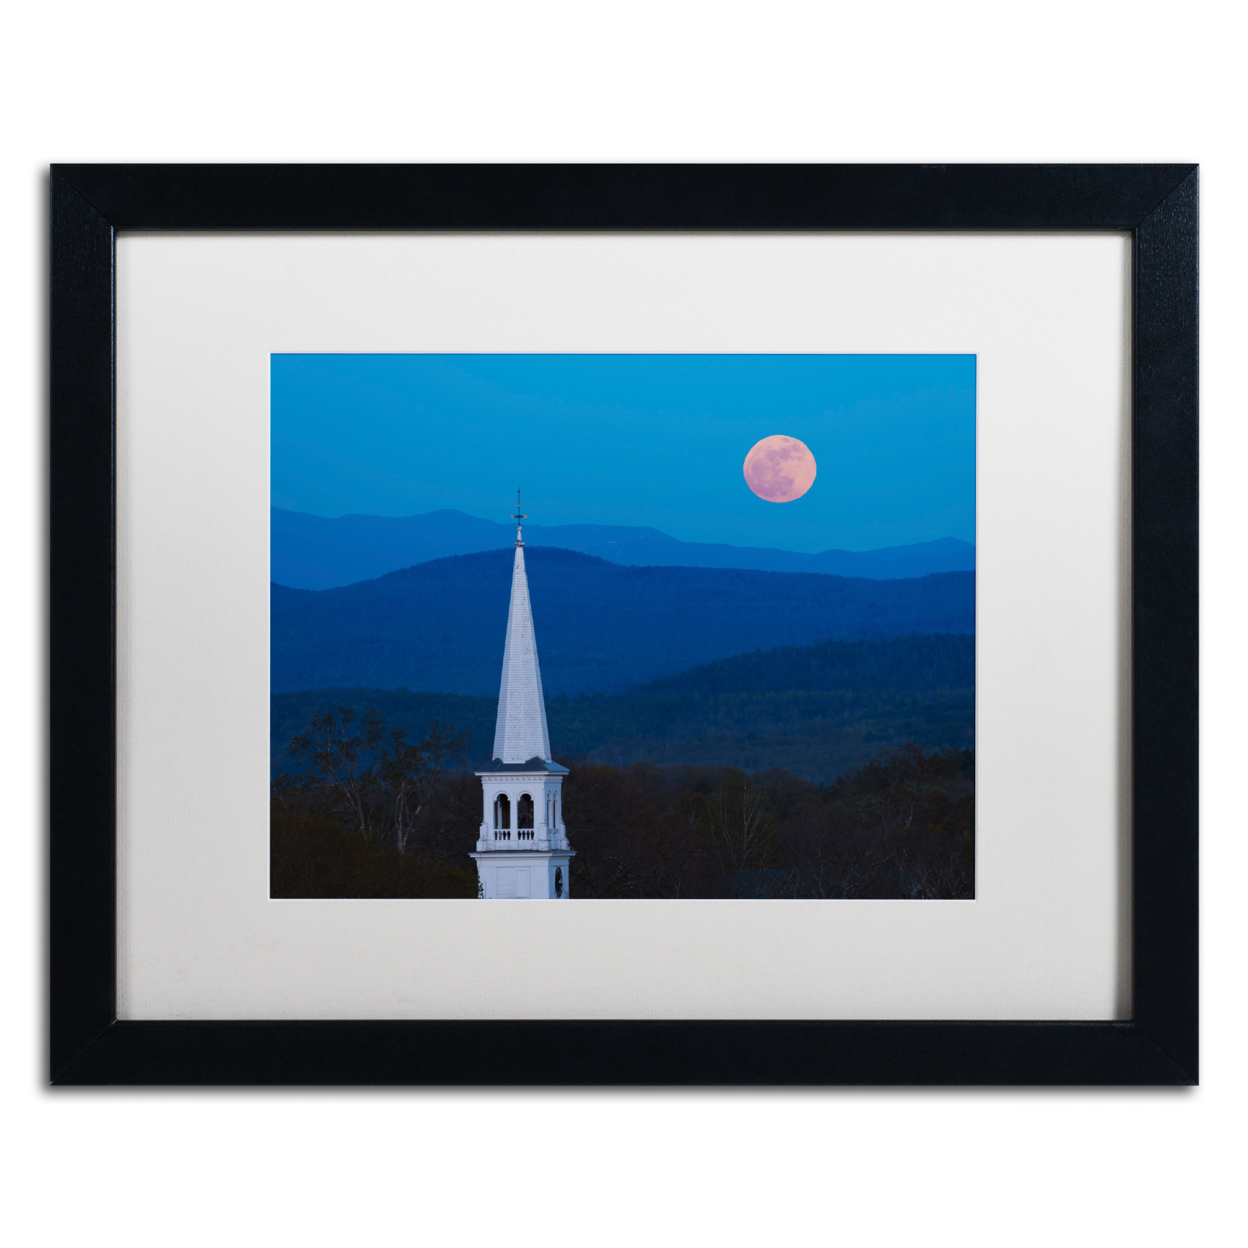 Michael Blanchette Photography 'Moon Over Vermont' Black Wooden Framed Art 18 X 22 Inches